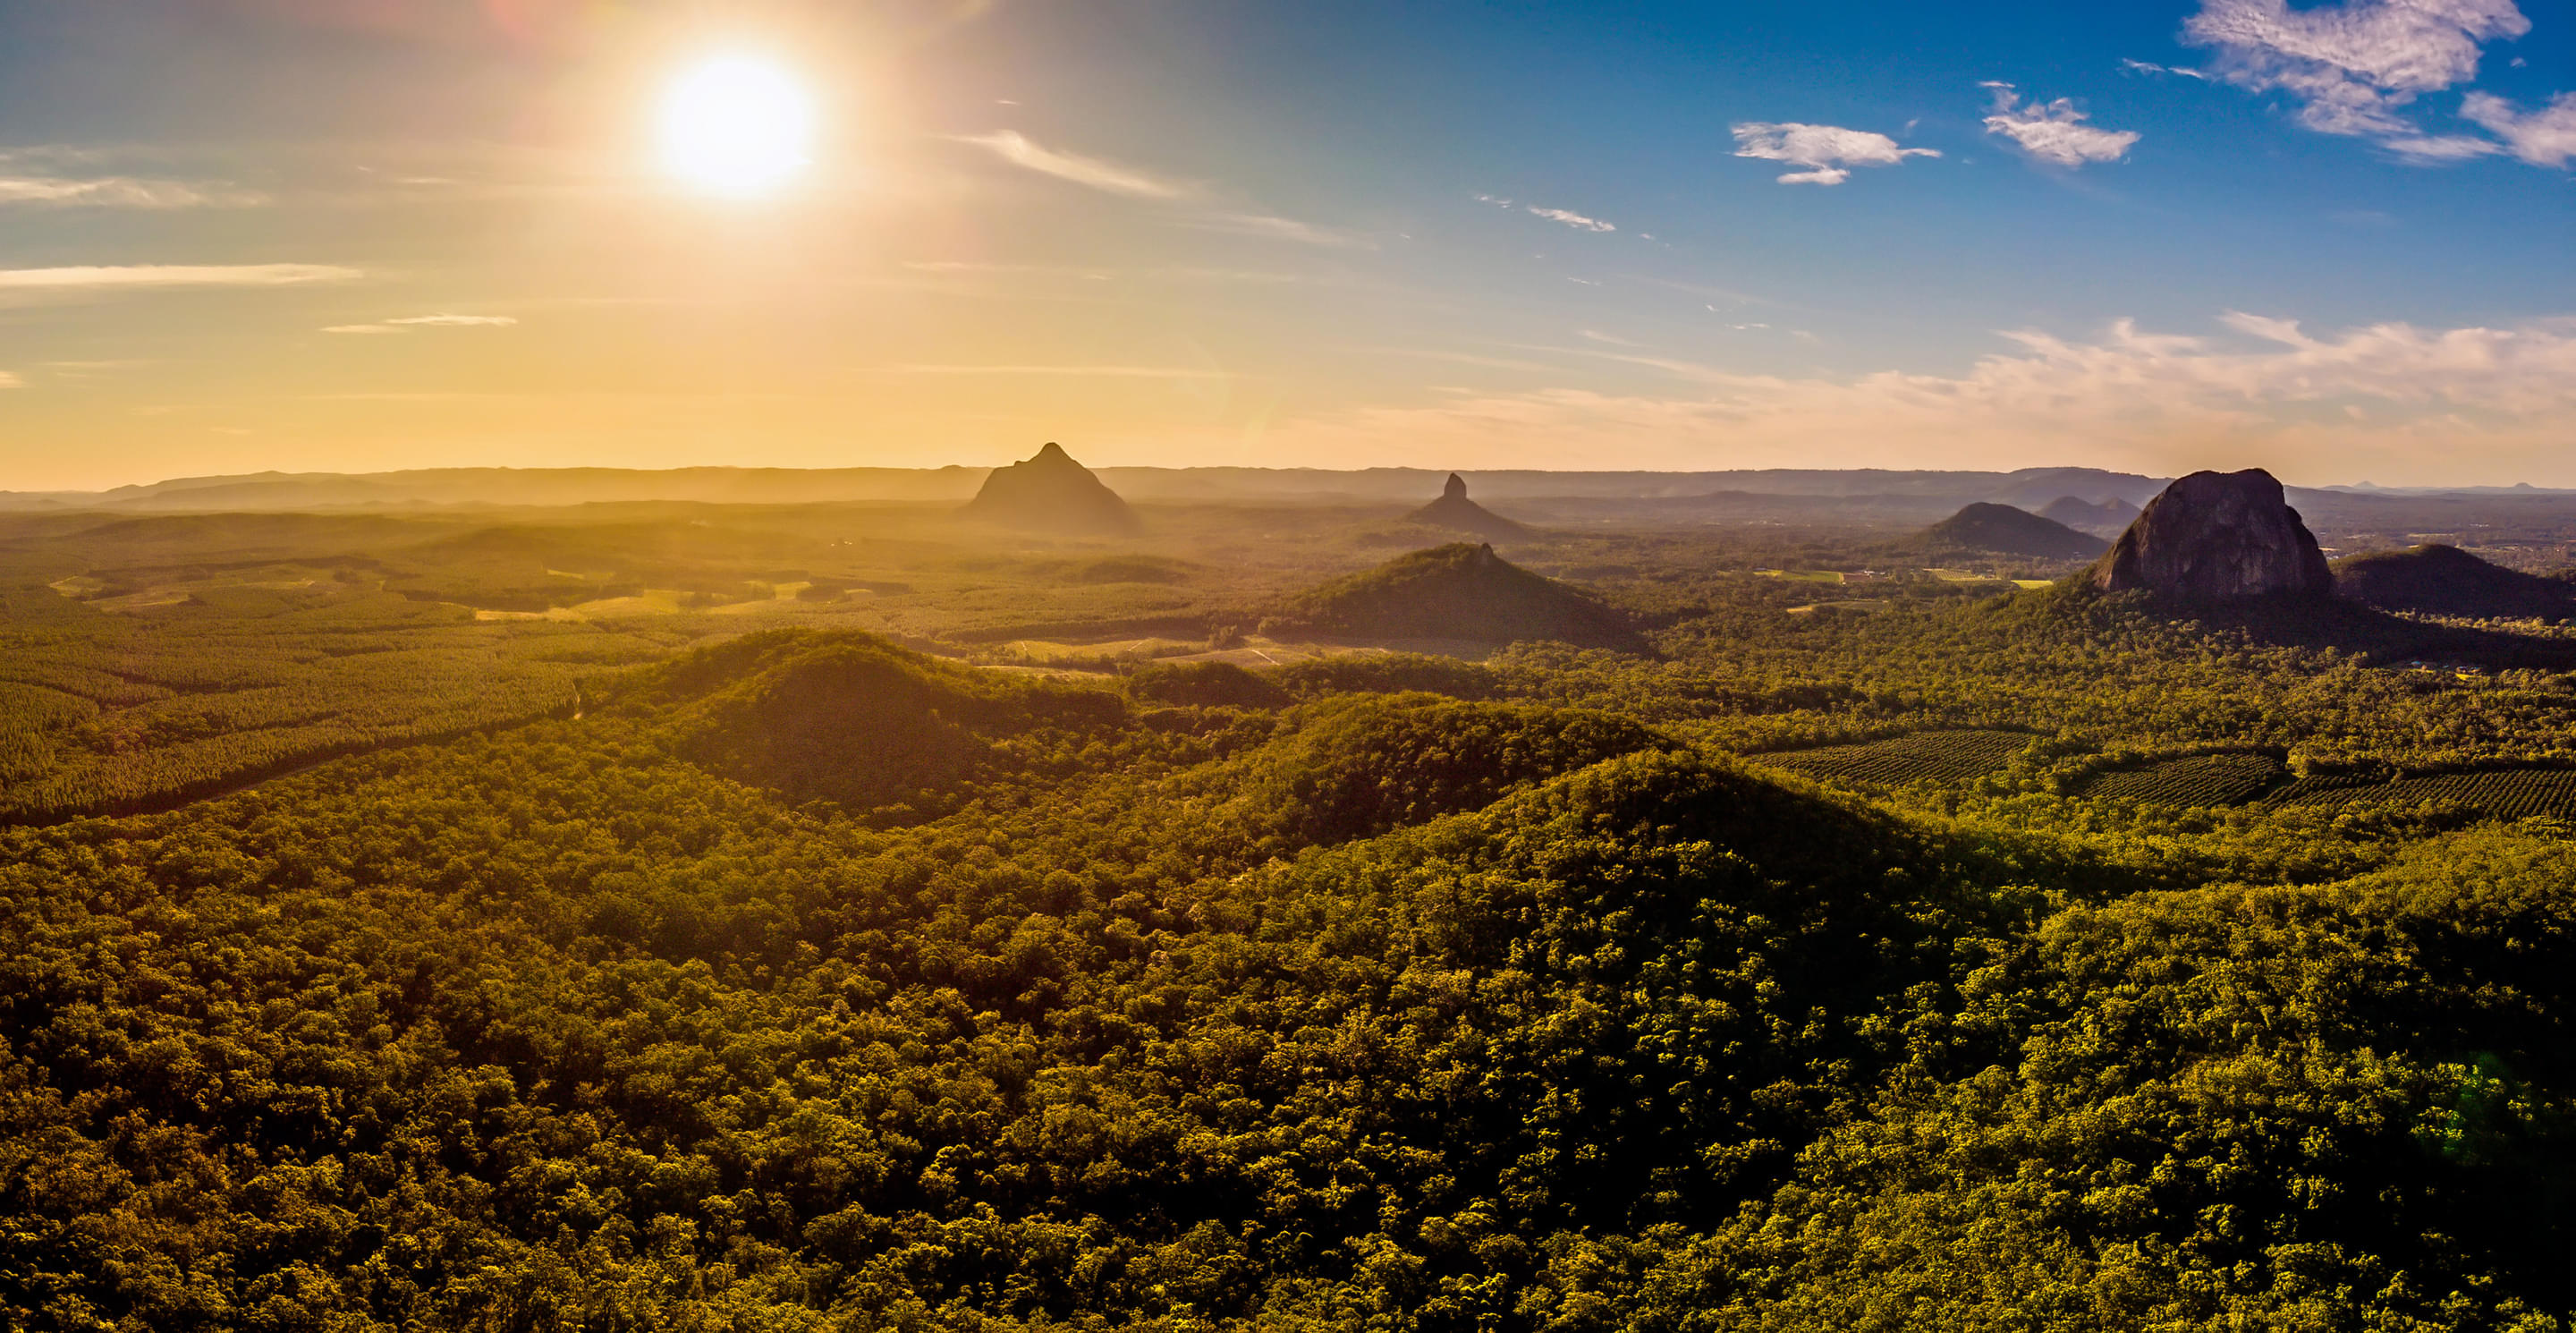 Glass House Mountains Overview